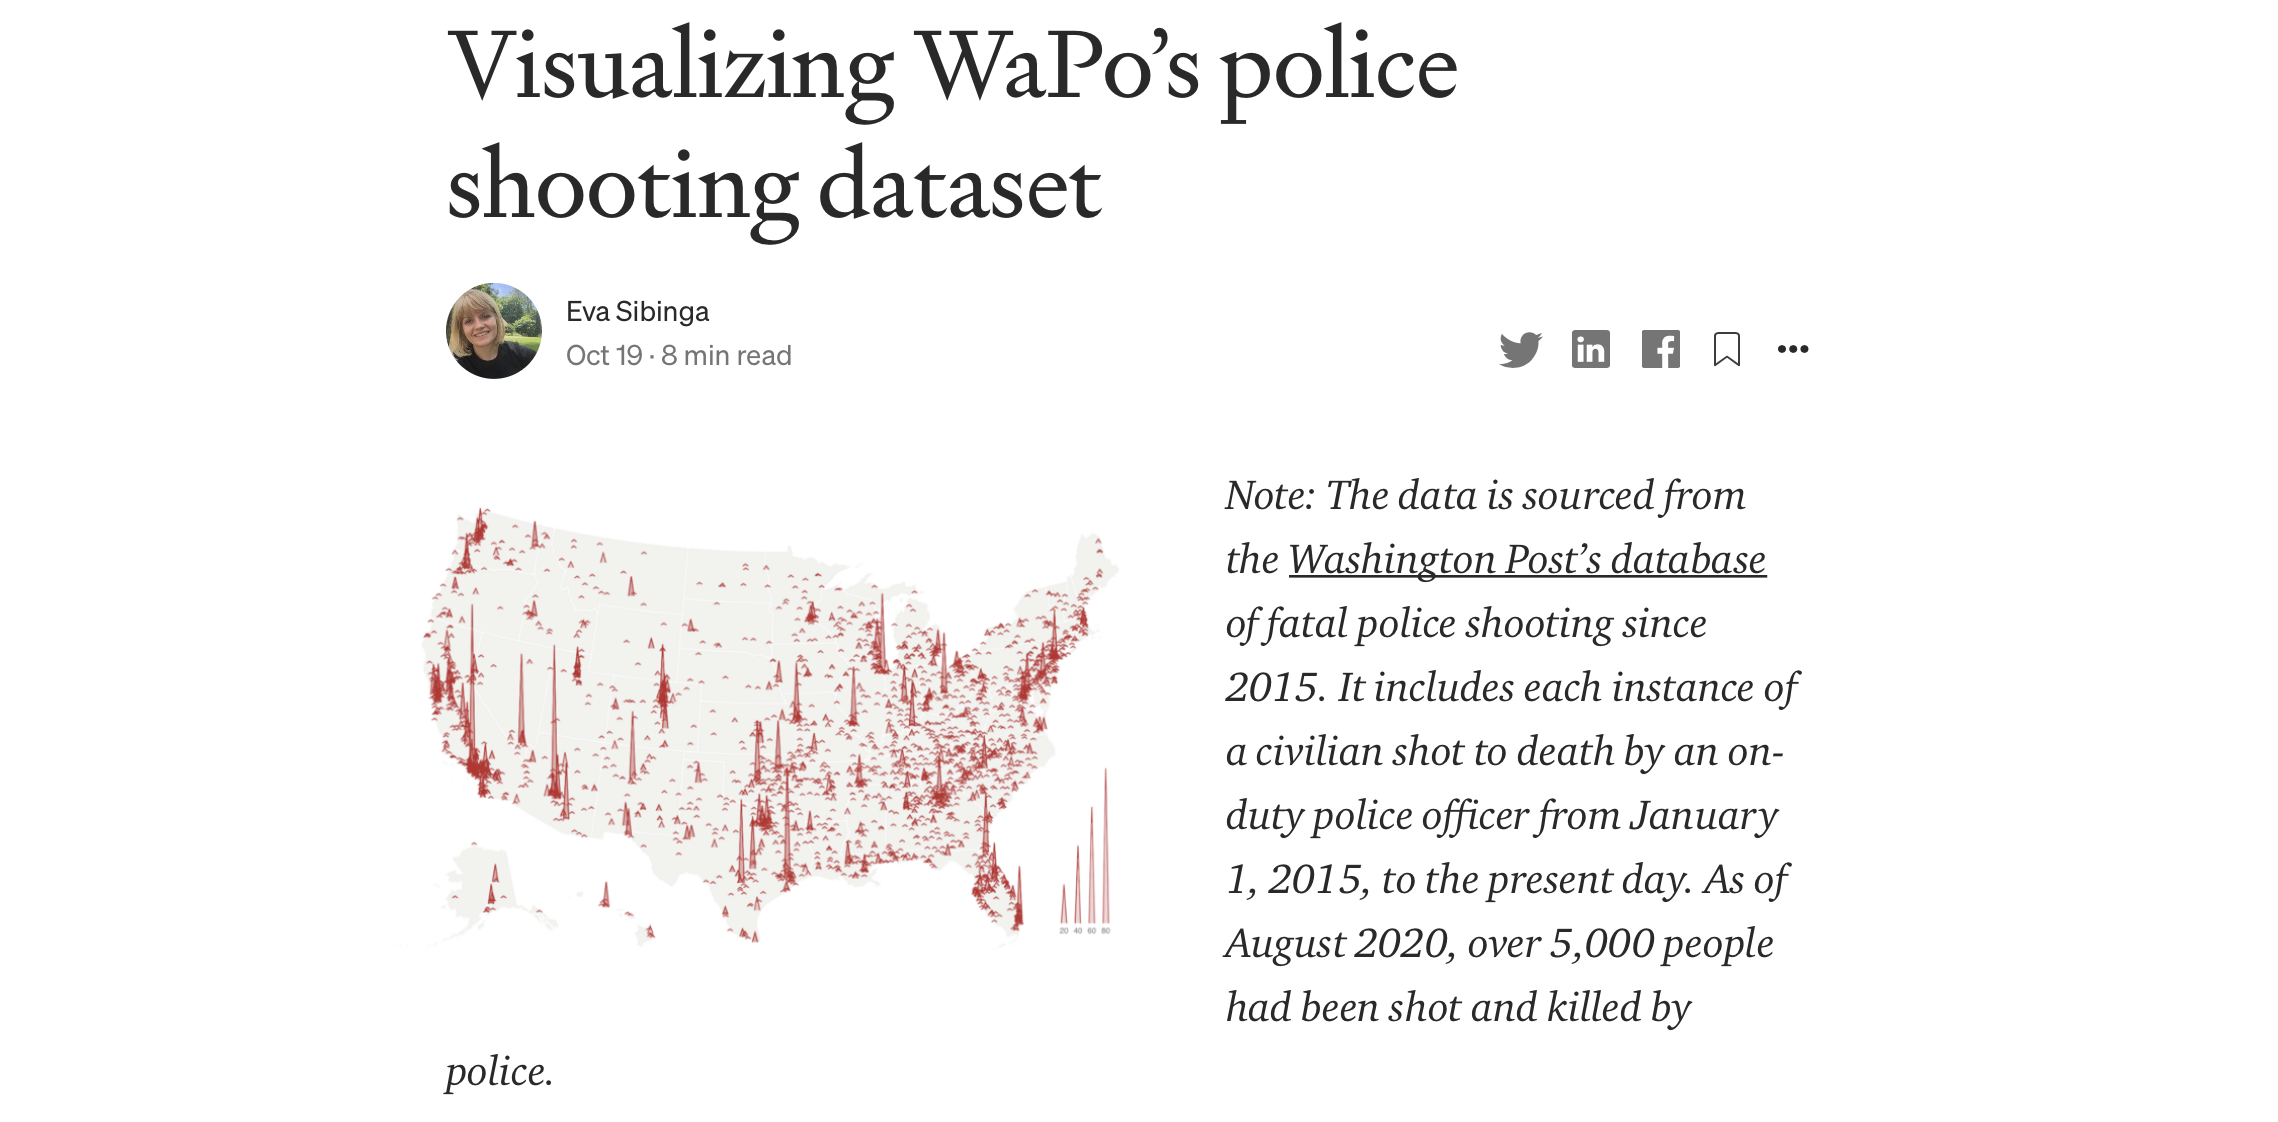 An article title and spikemap showing police shooting deaths in the US since 2015